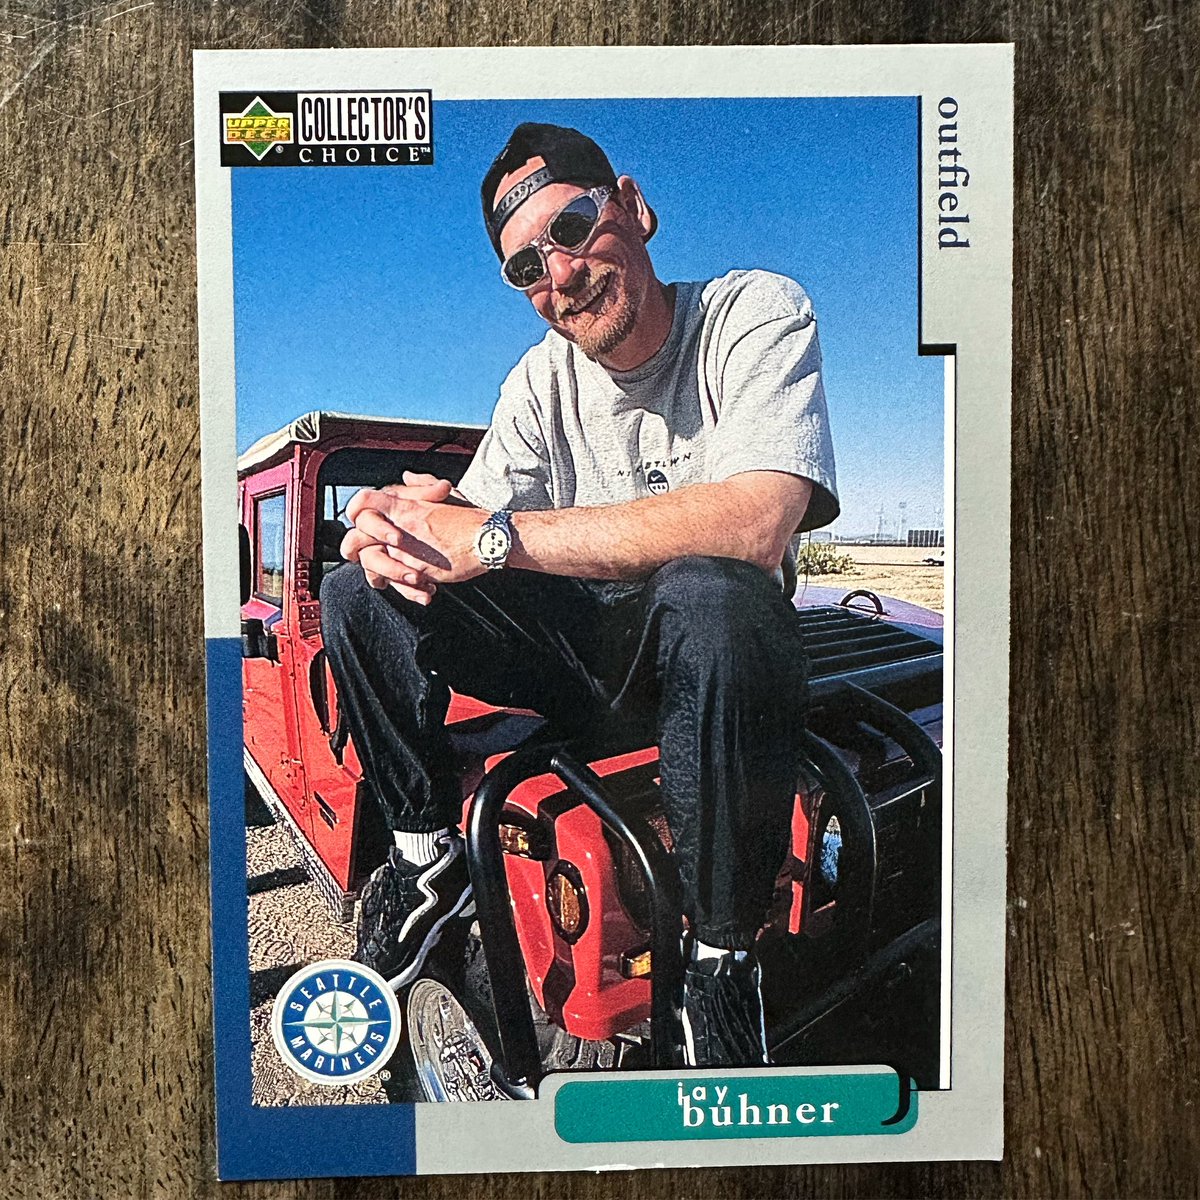 Junk Wax Portraits: Jay “Hummer” Buhner. People forget how awesome of a hitter Jay was. Easy when you are with Griffey Jr., but he could launch them consistently over the fence! Hummer hit the scene in 1992, as kids we dreamed of having this ride. #jaybuhner #upperdeck #cards